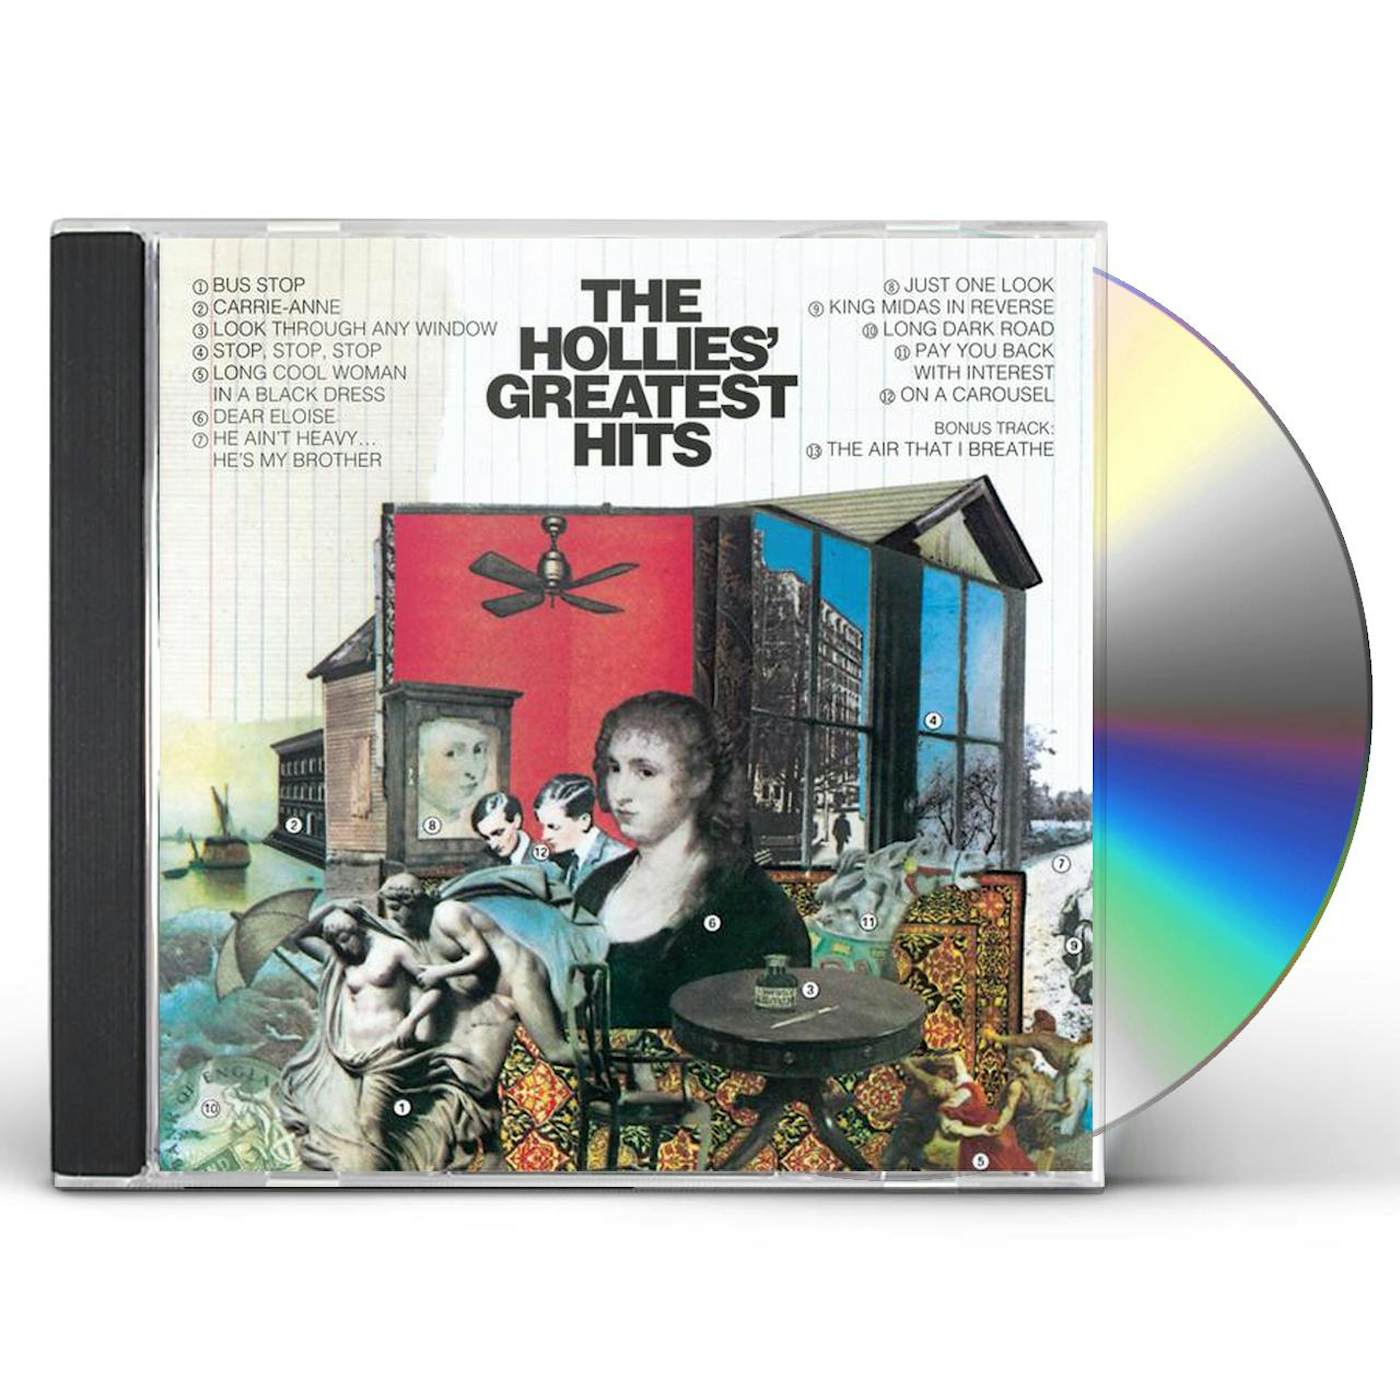 The Hollies GREATEST HITS CD